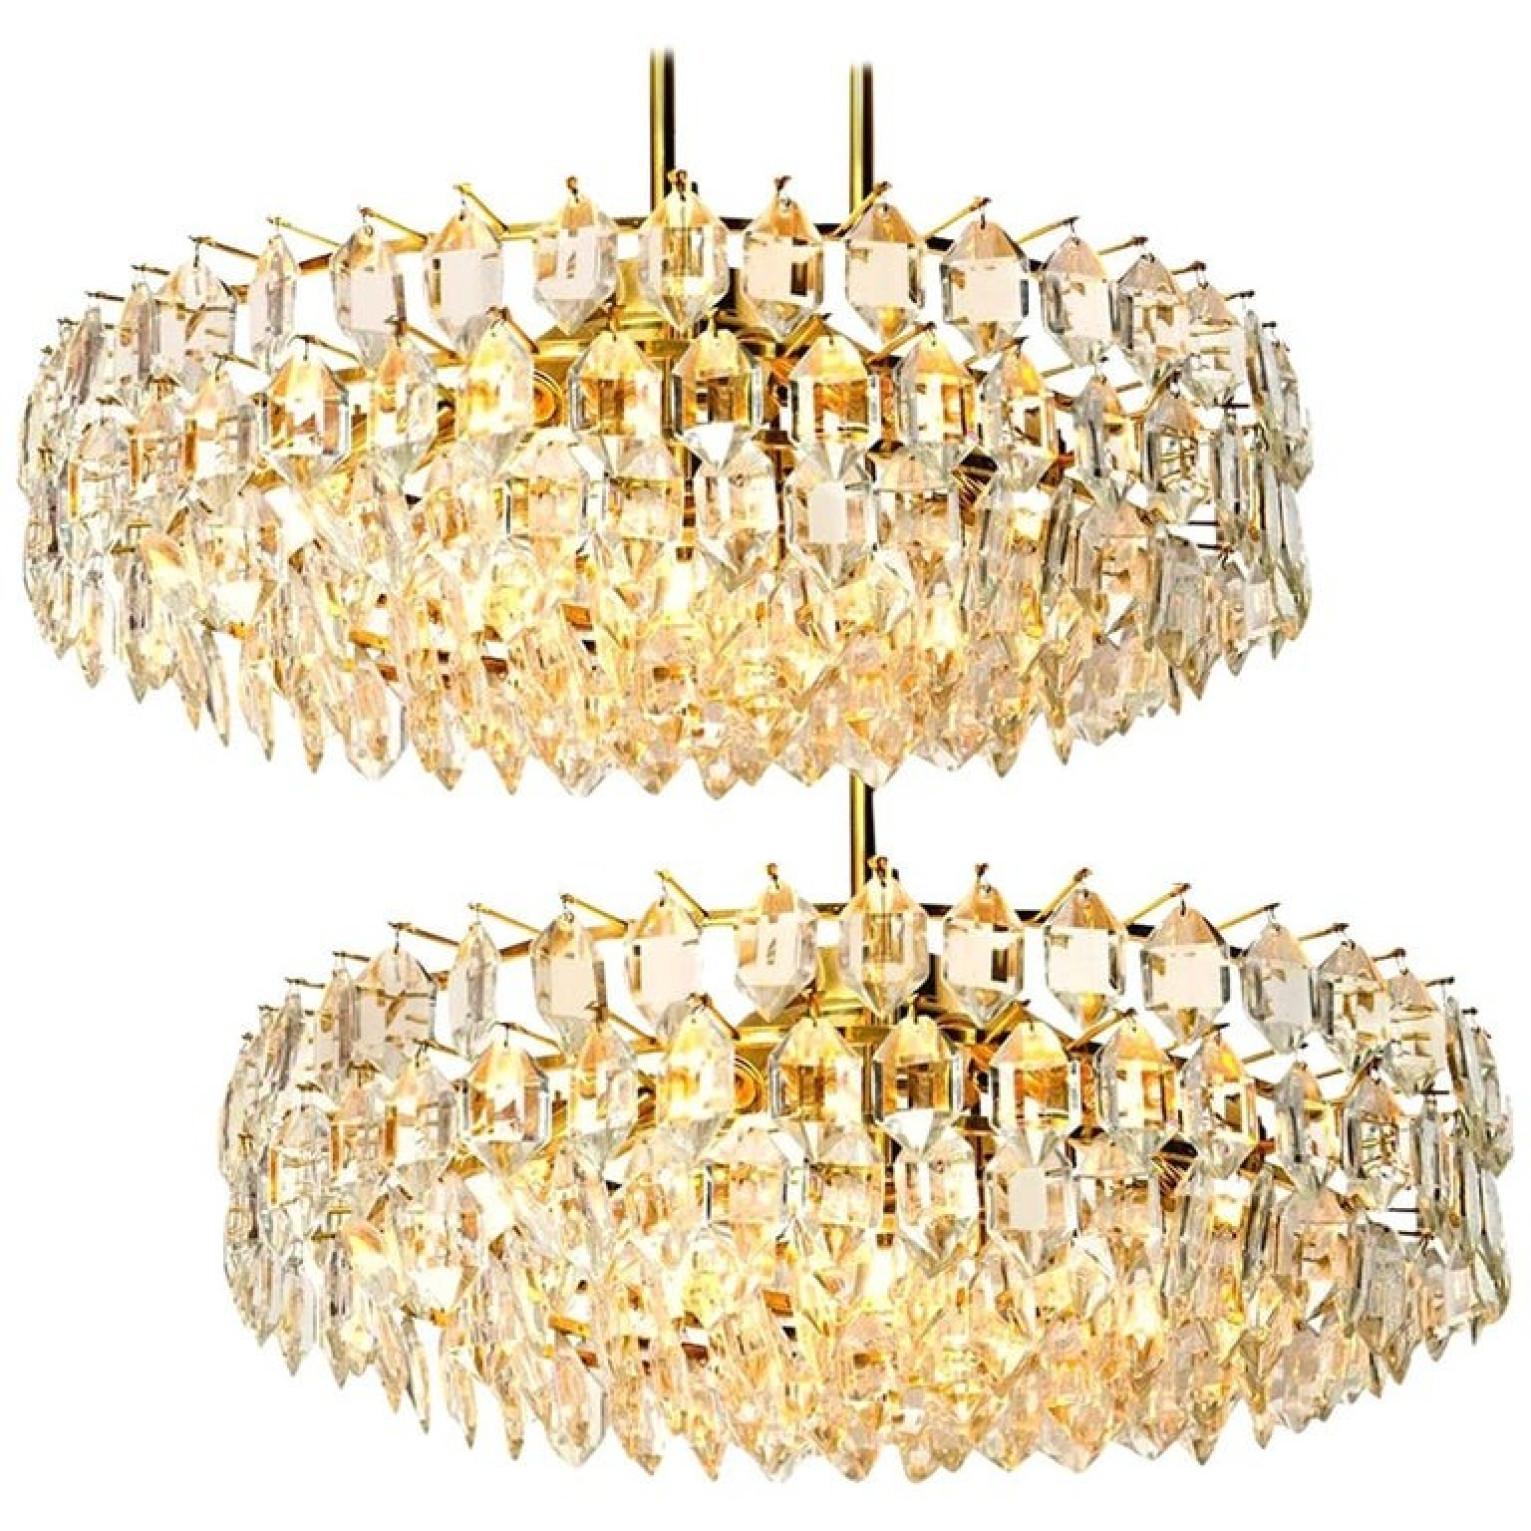 A pair of elegant chandeliers by Bakalowits & Sohne, Austria. The chandeliers are manufactured in circa 1960-1969. With huge gem-like crystals and gilded brass frame. The crystals are meticulously cut in such a way that radiate the light of the